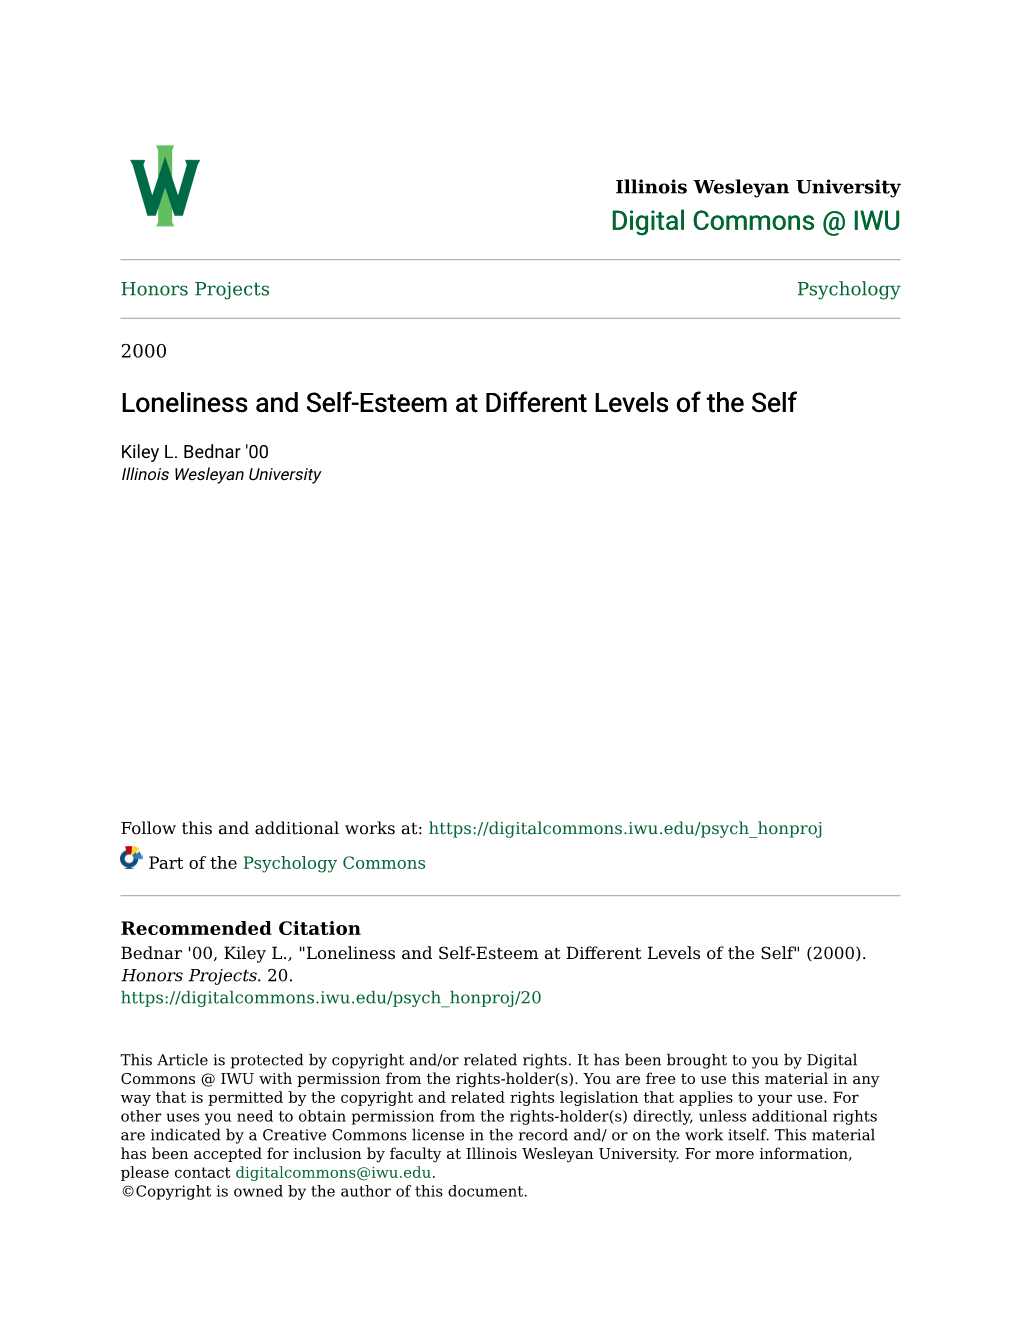 Loneliness and Self-Esteem at Different Levels of the Self